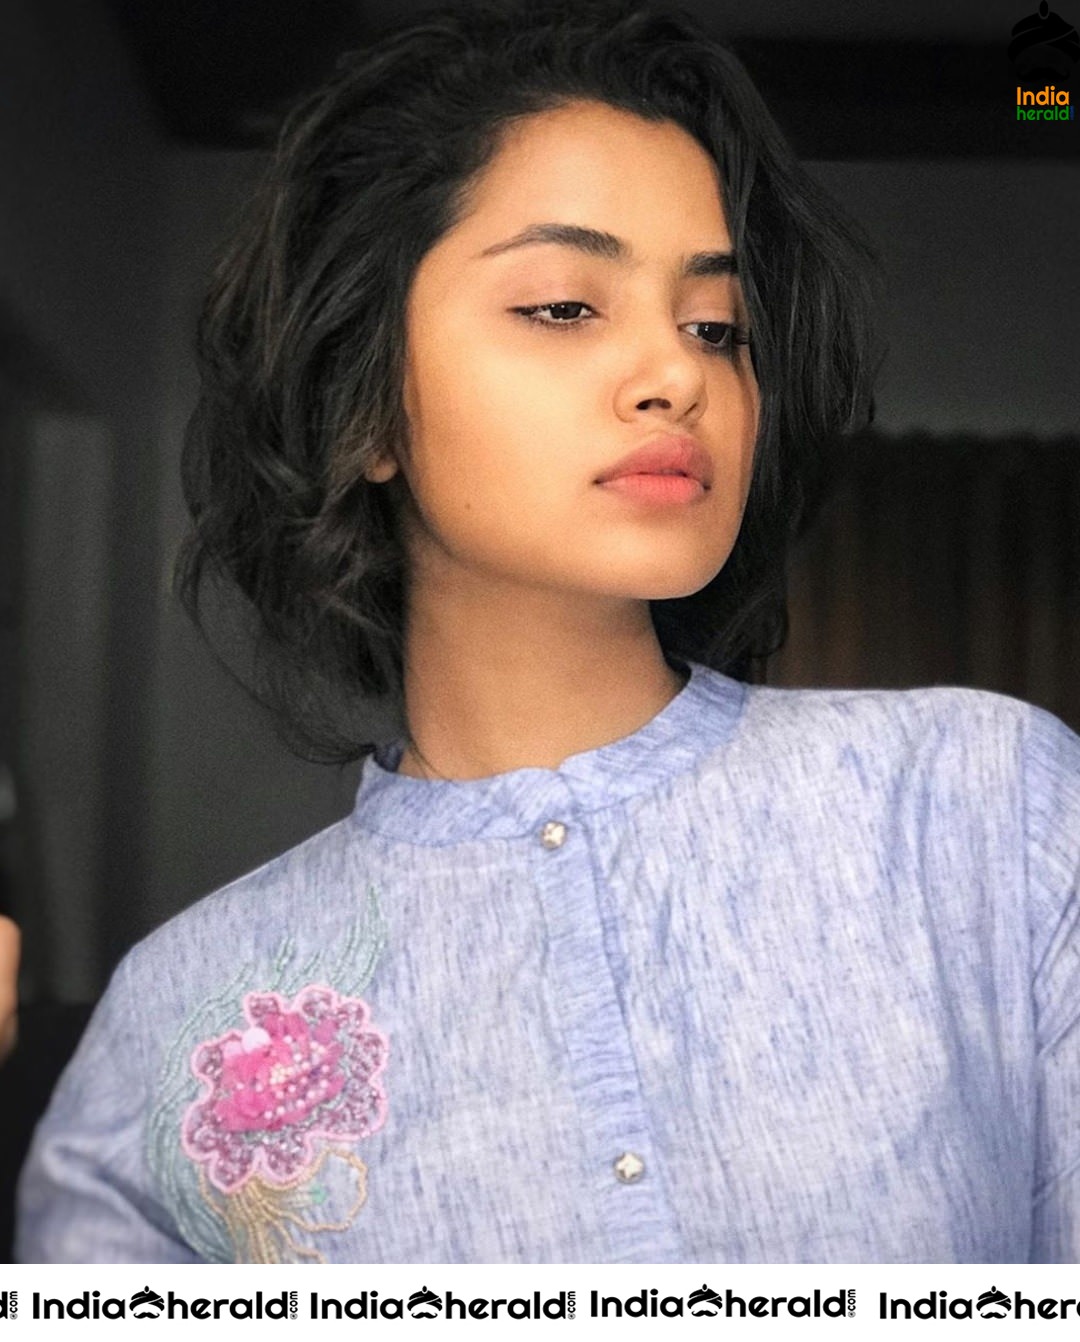 Anupama Shows her Cuteness on a Good Hair Day